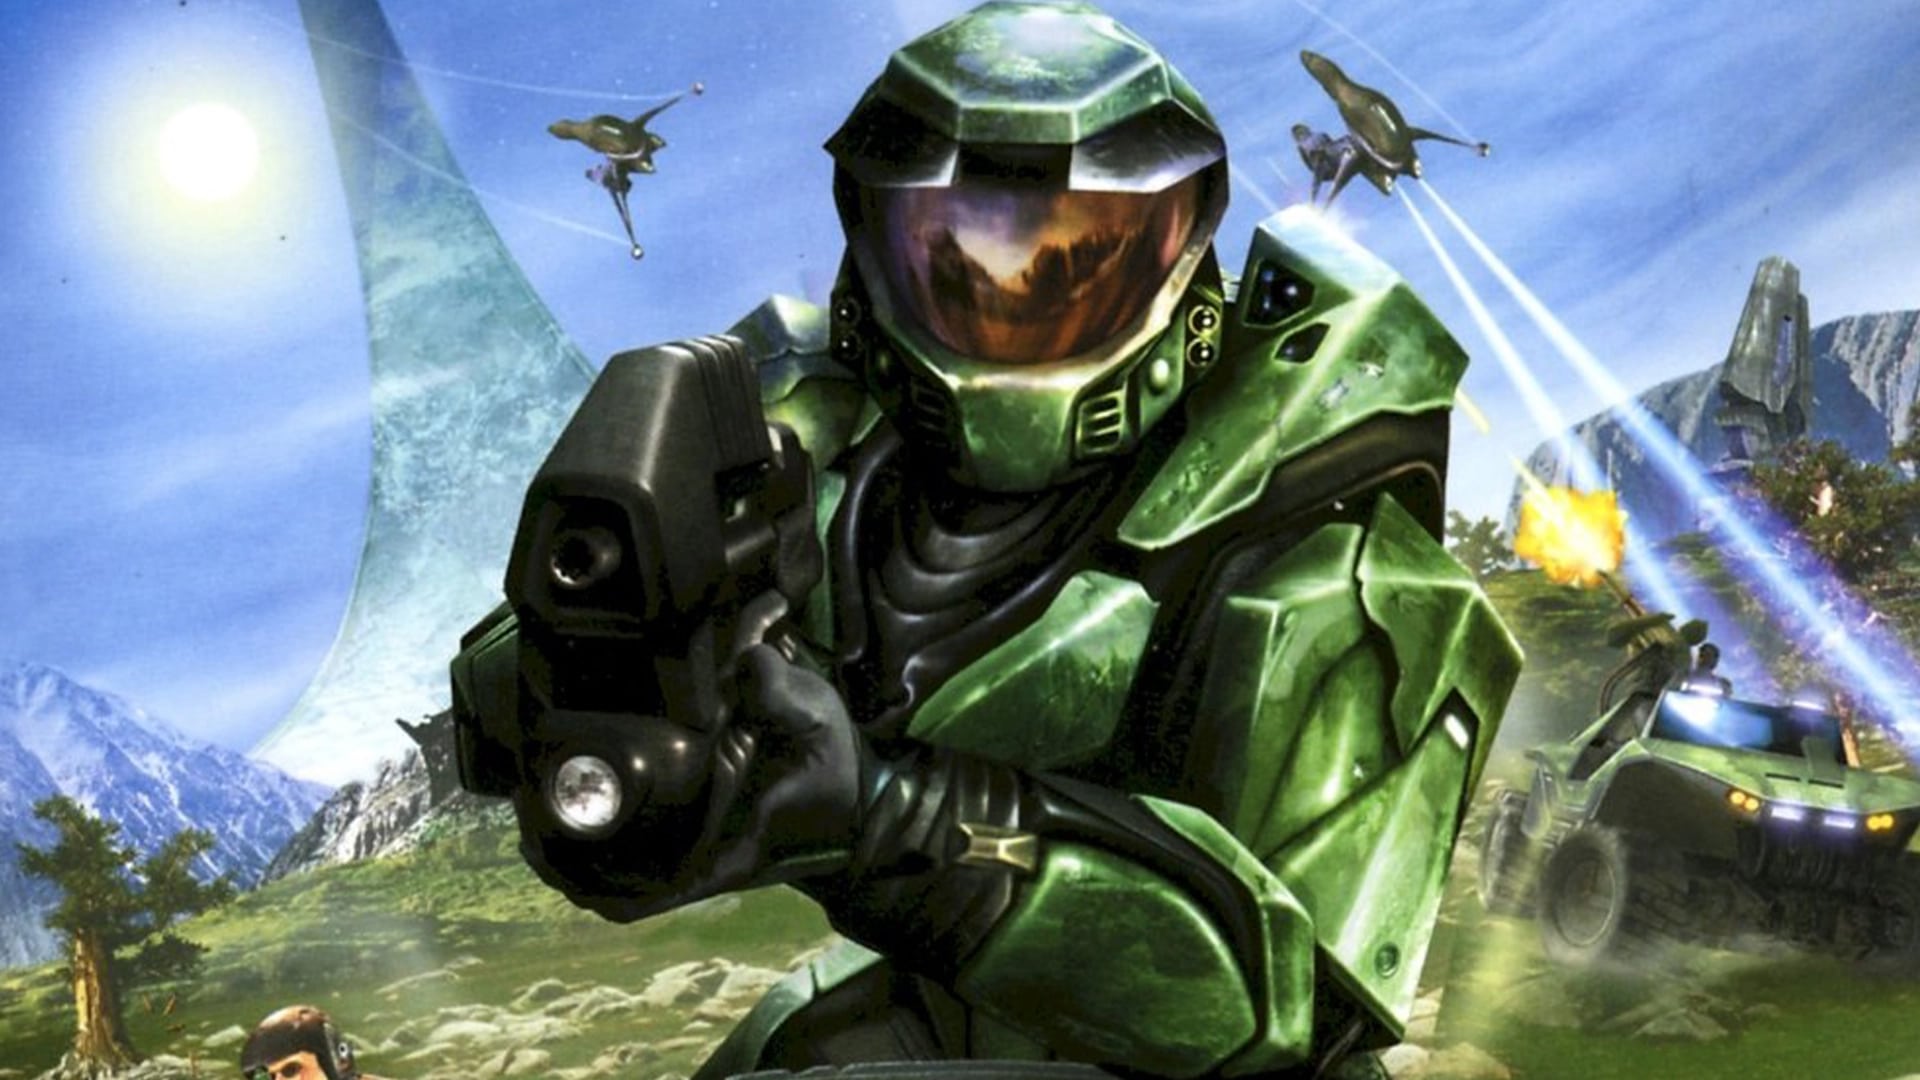 Why Halo: Combat Evolved is One of the Greatest Games Ever